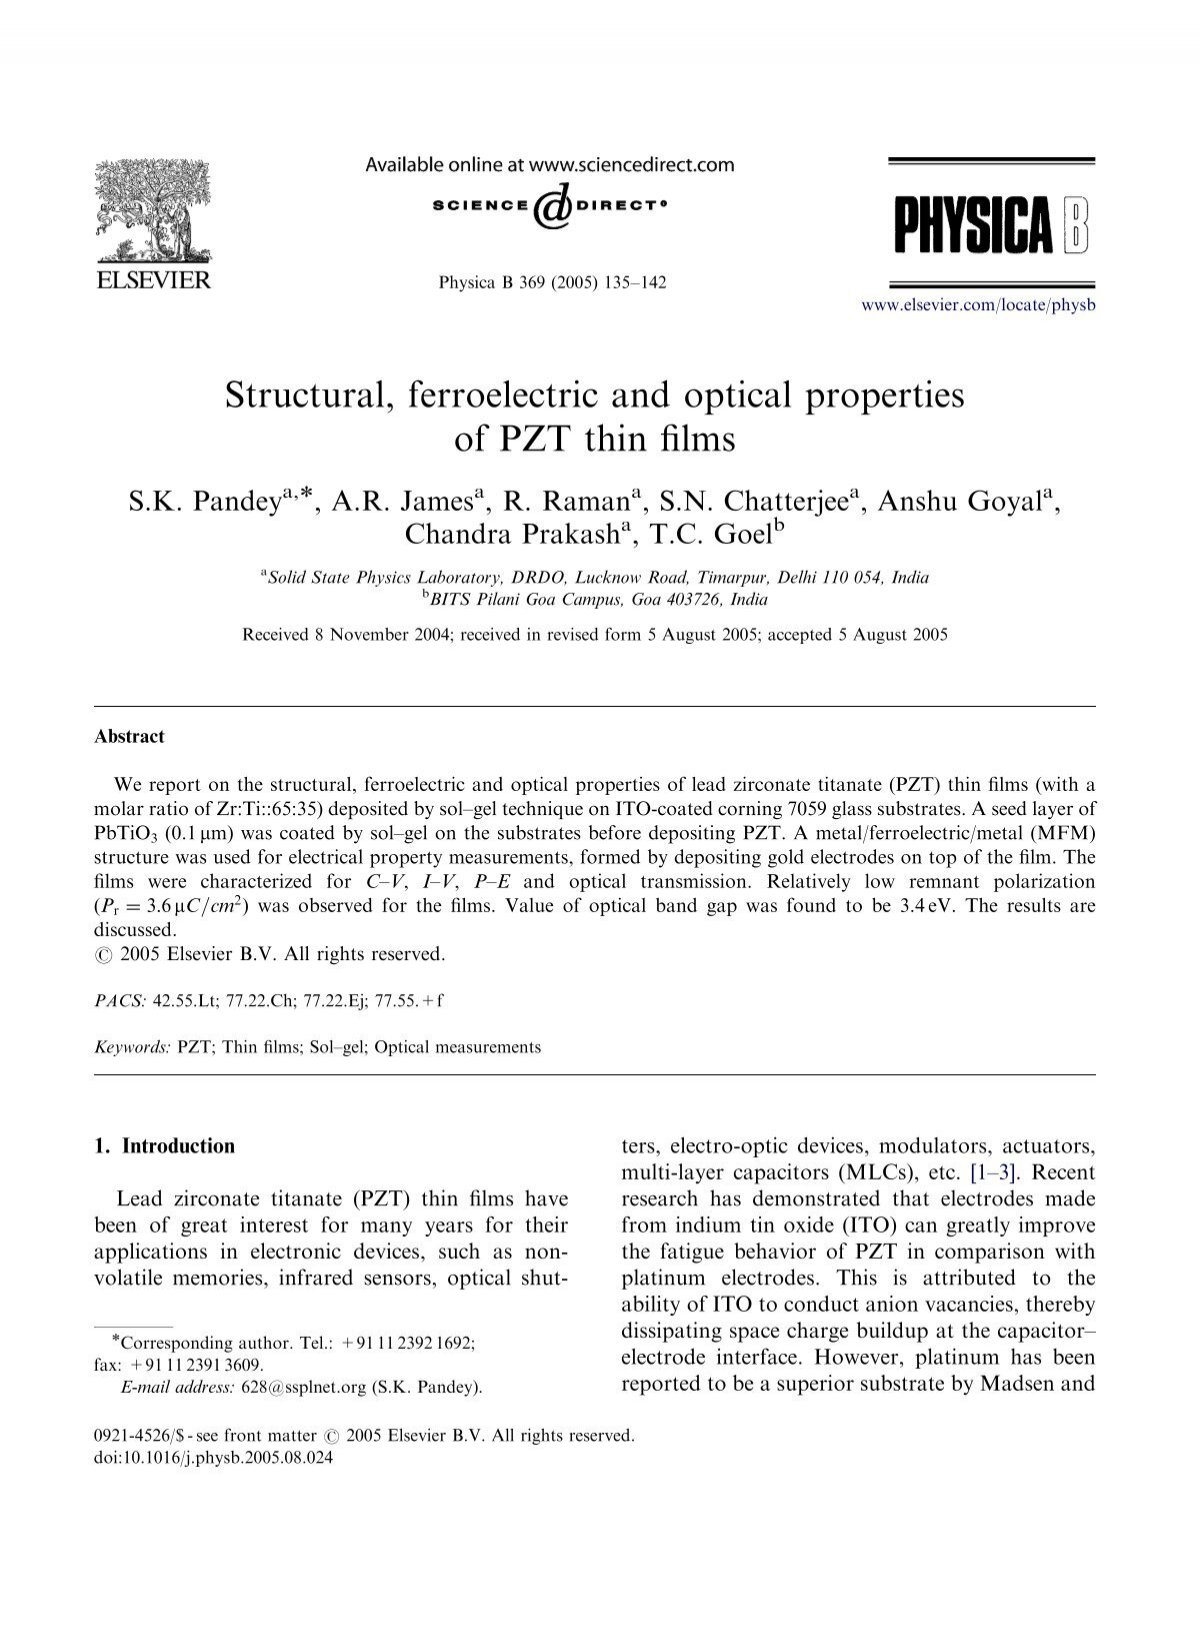 Structural Ferroelectric And Optical Properties Of Pzt Thin Films